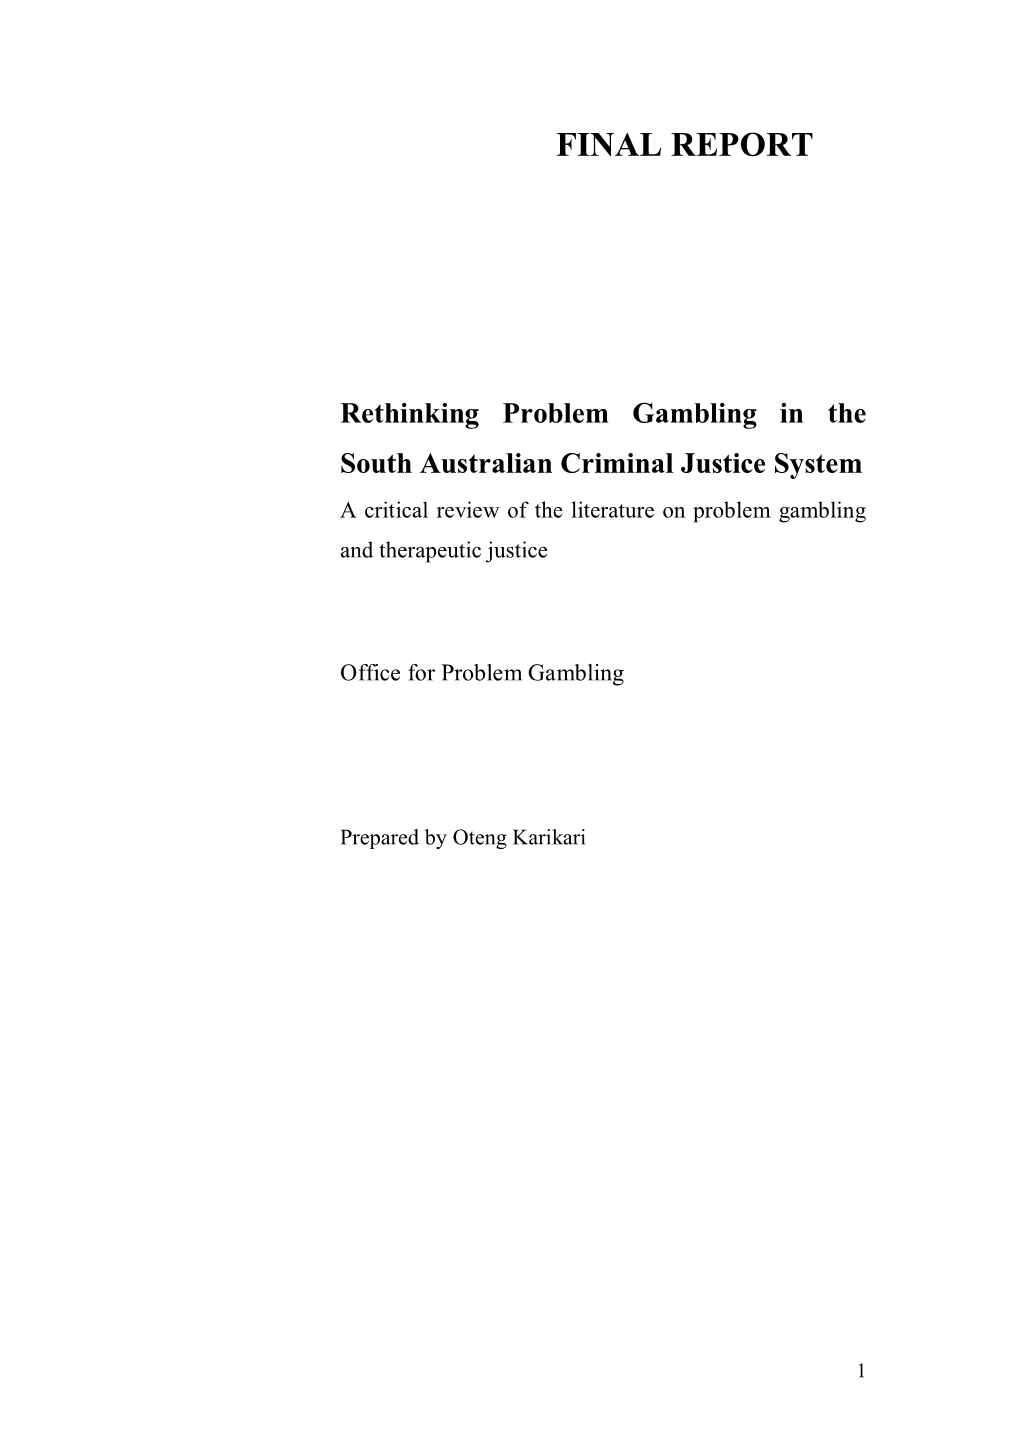 Problem Gambling in the Criminal Justice System In